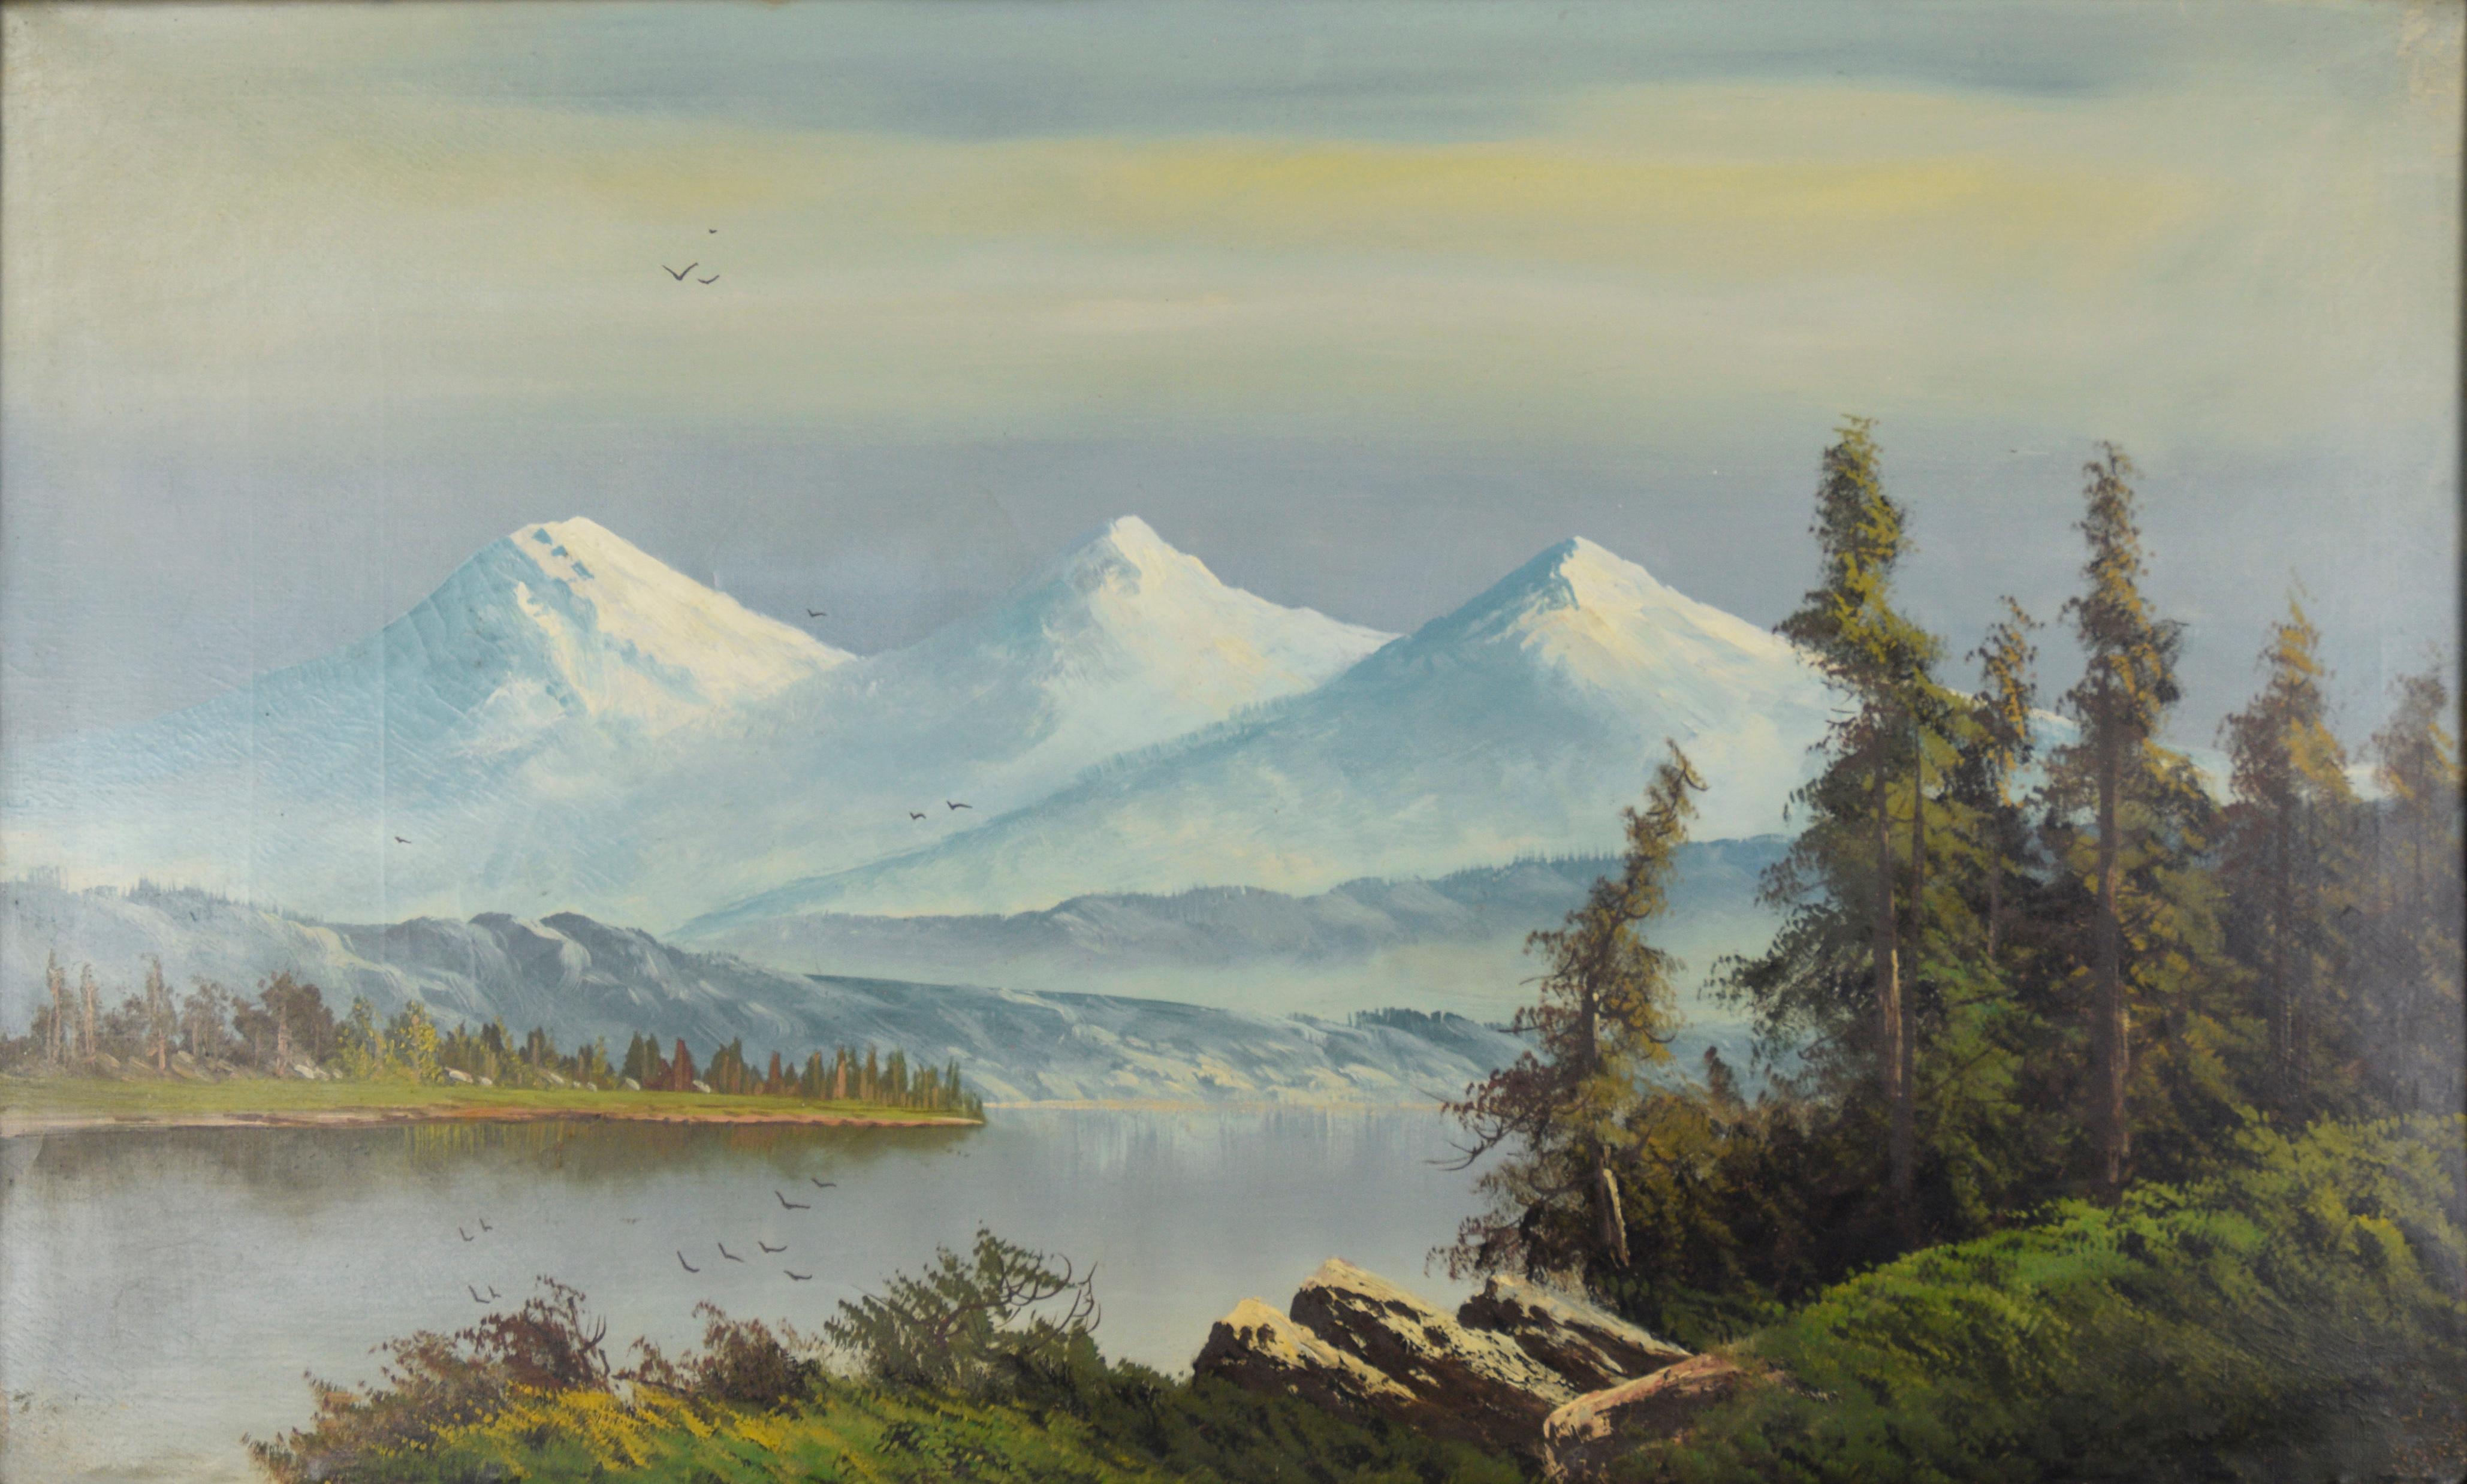 Three Sisters in the Cascade Range, Oregon Lake with Birds Migrating - Painting by John Englehart